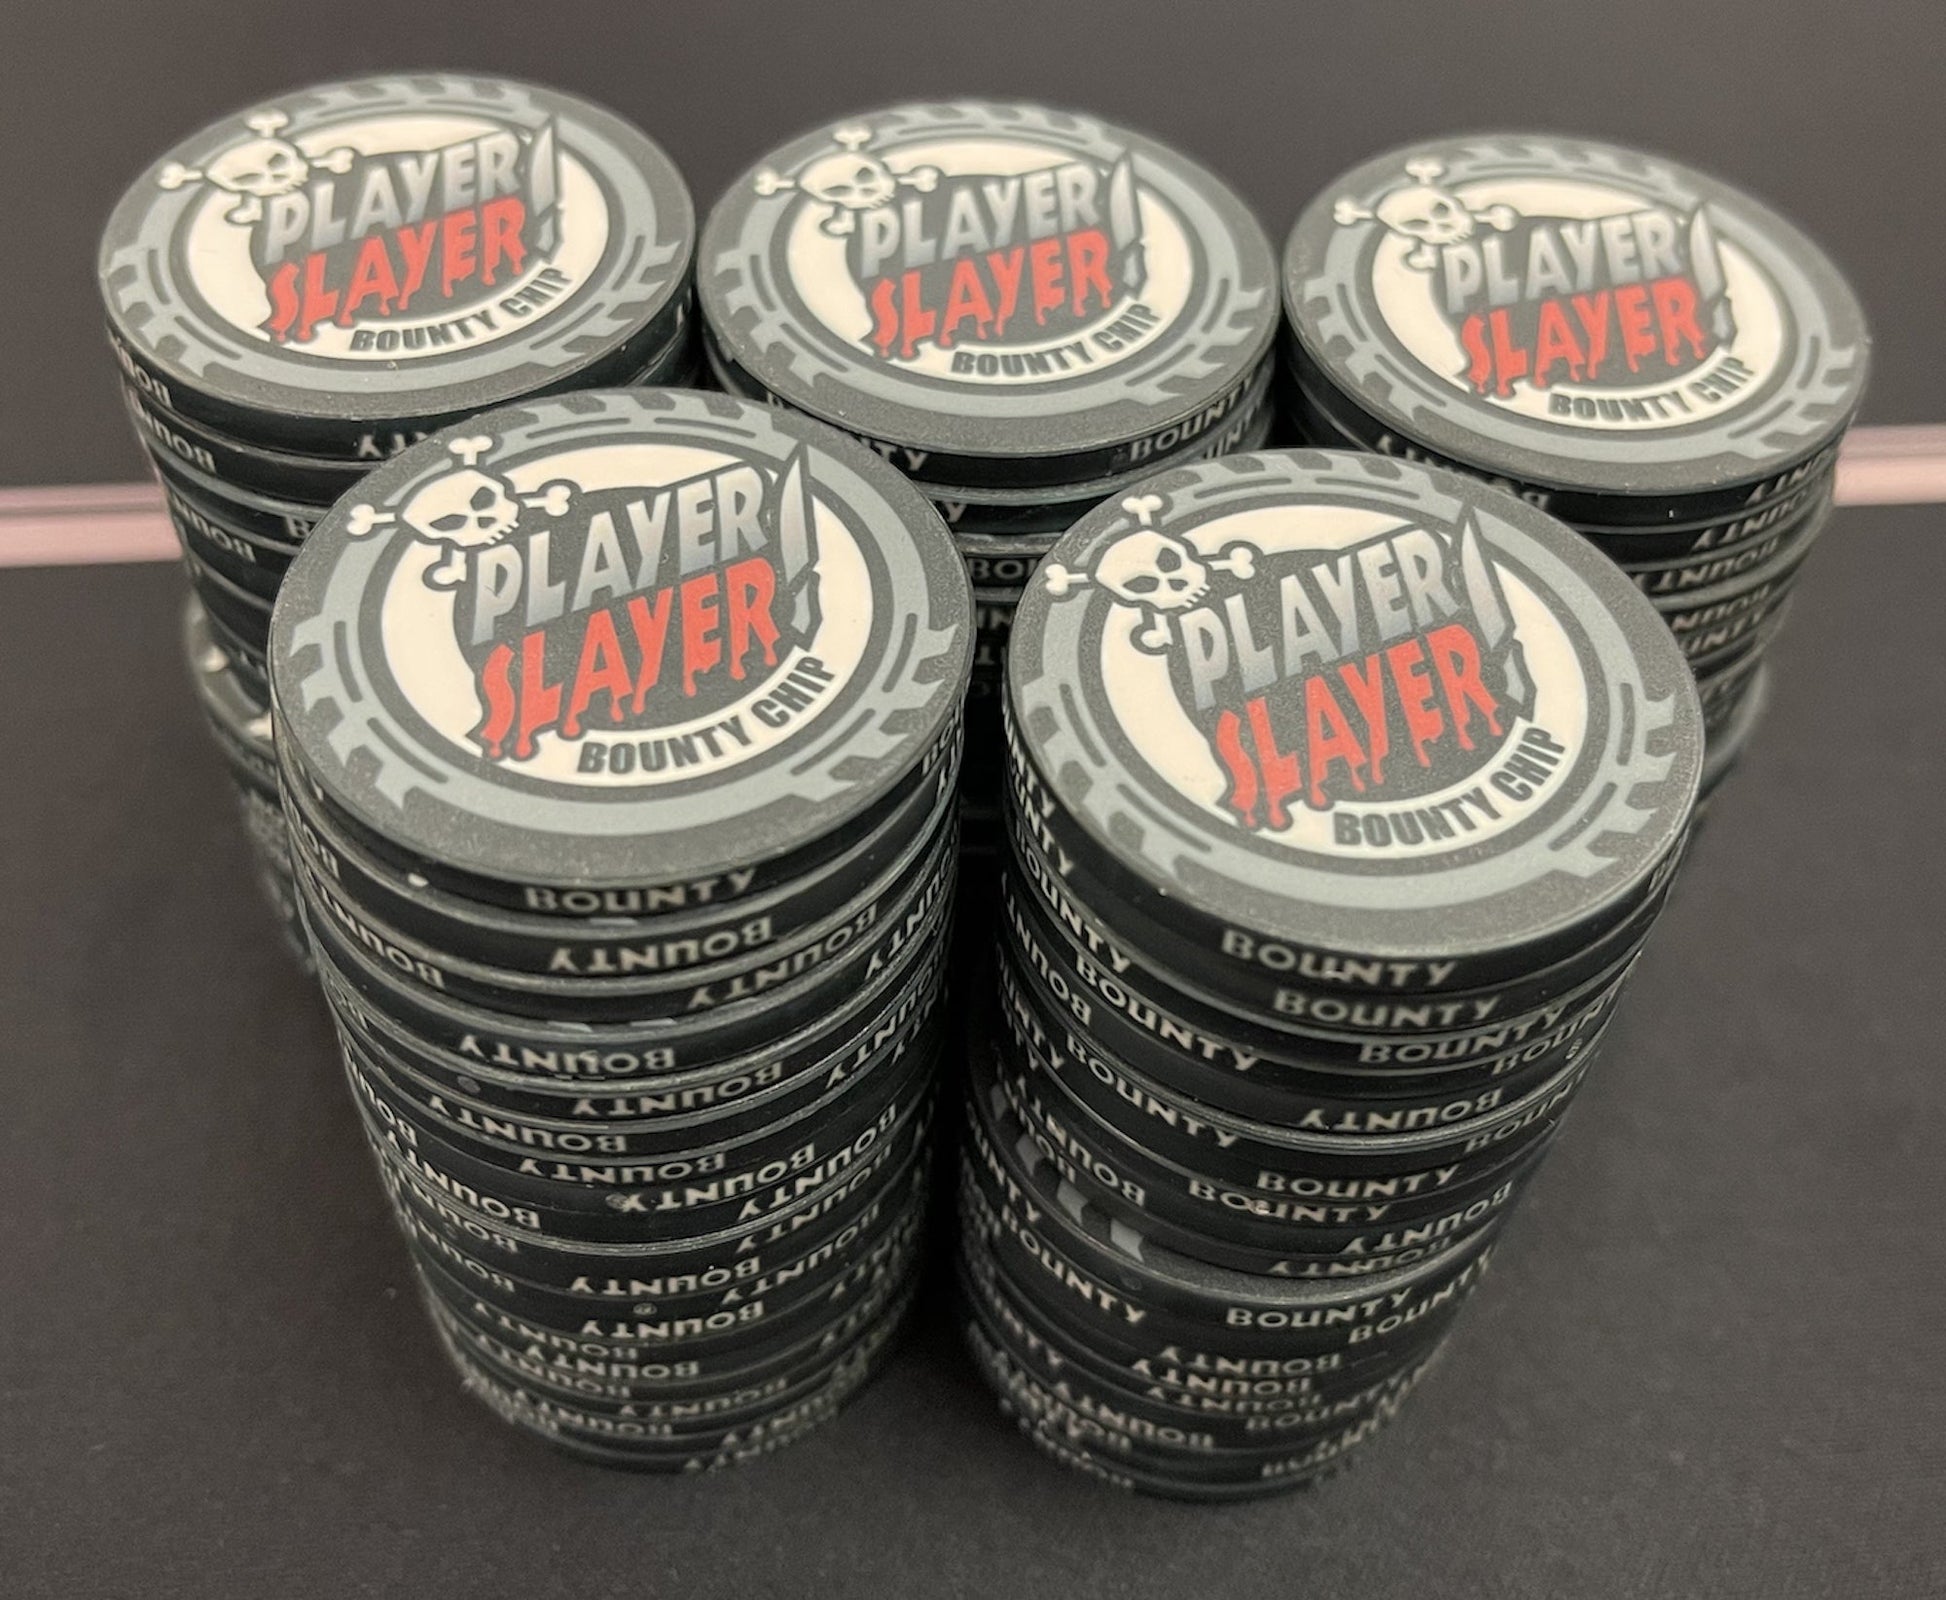 Impress all of your poker party friends with the Player Slayer Bounty Poker Chips to your home poker tourney. These tough-looking poker chips were designed with a cool skull and bloody lettering to reflect the cutthroat nature of poker tournaments. The neutral black, white, gray, and red color scheme matches just about any poker chip set from any online poker chip seller or brick-and-mortar poker supply.